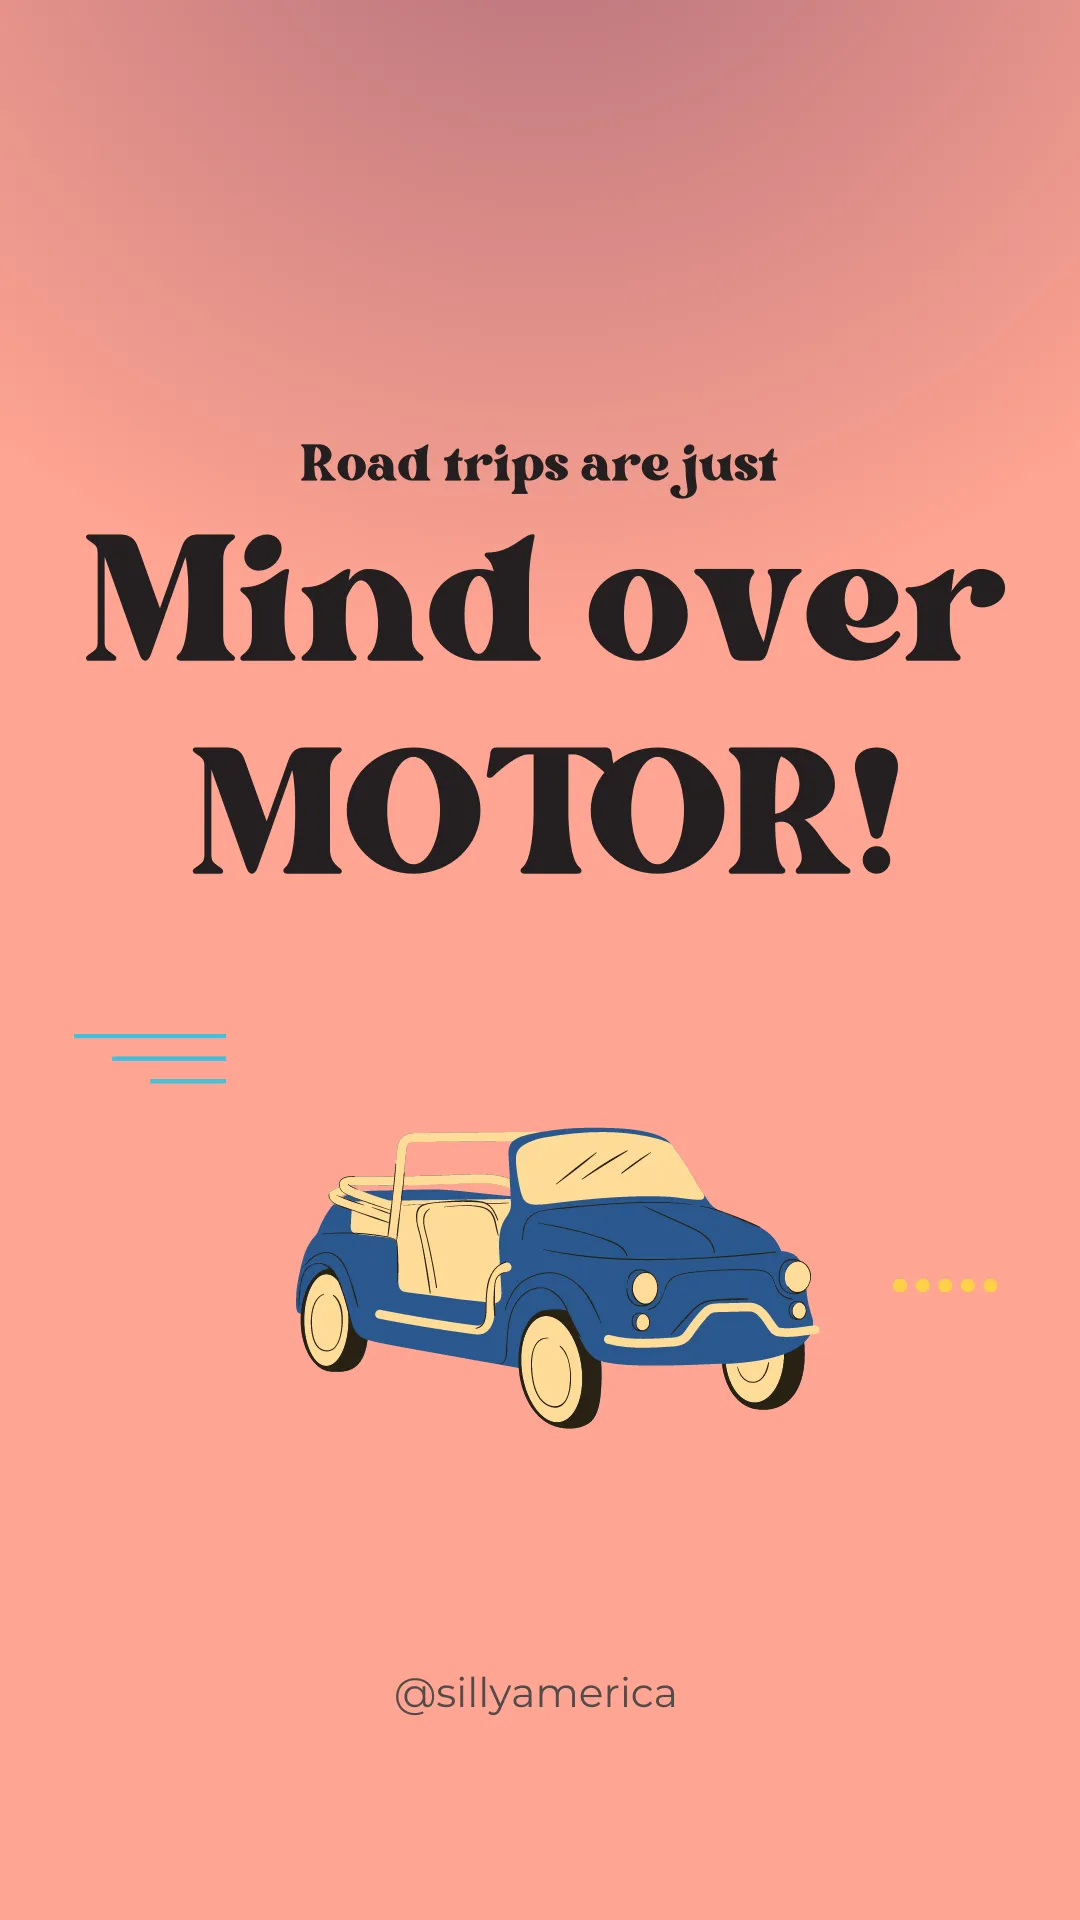 Road trips are just mind over MOTOR! - Road Trip Puns